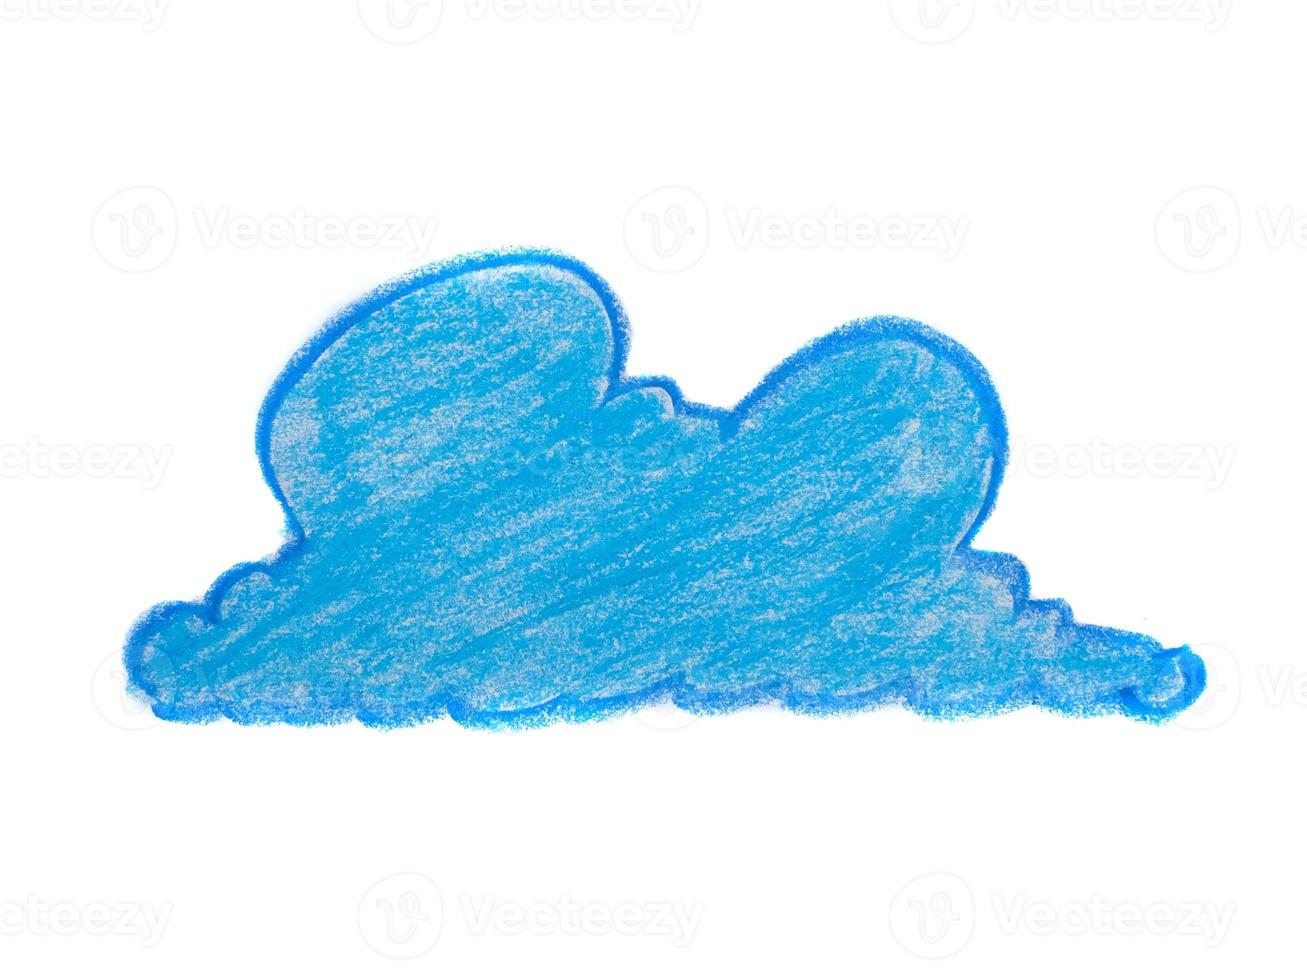 Abstract image with cloud-like shape, Crayon scribbled texture. photo